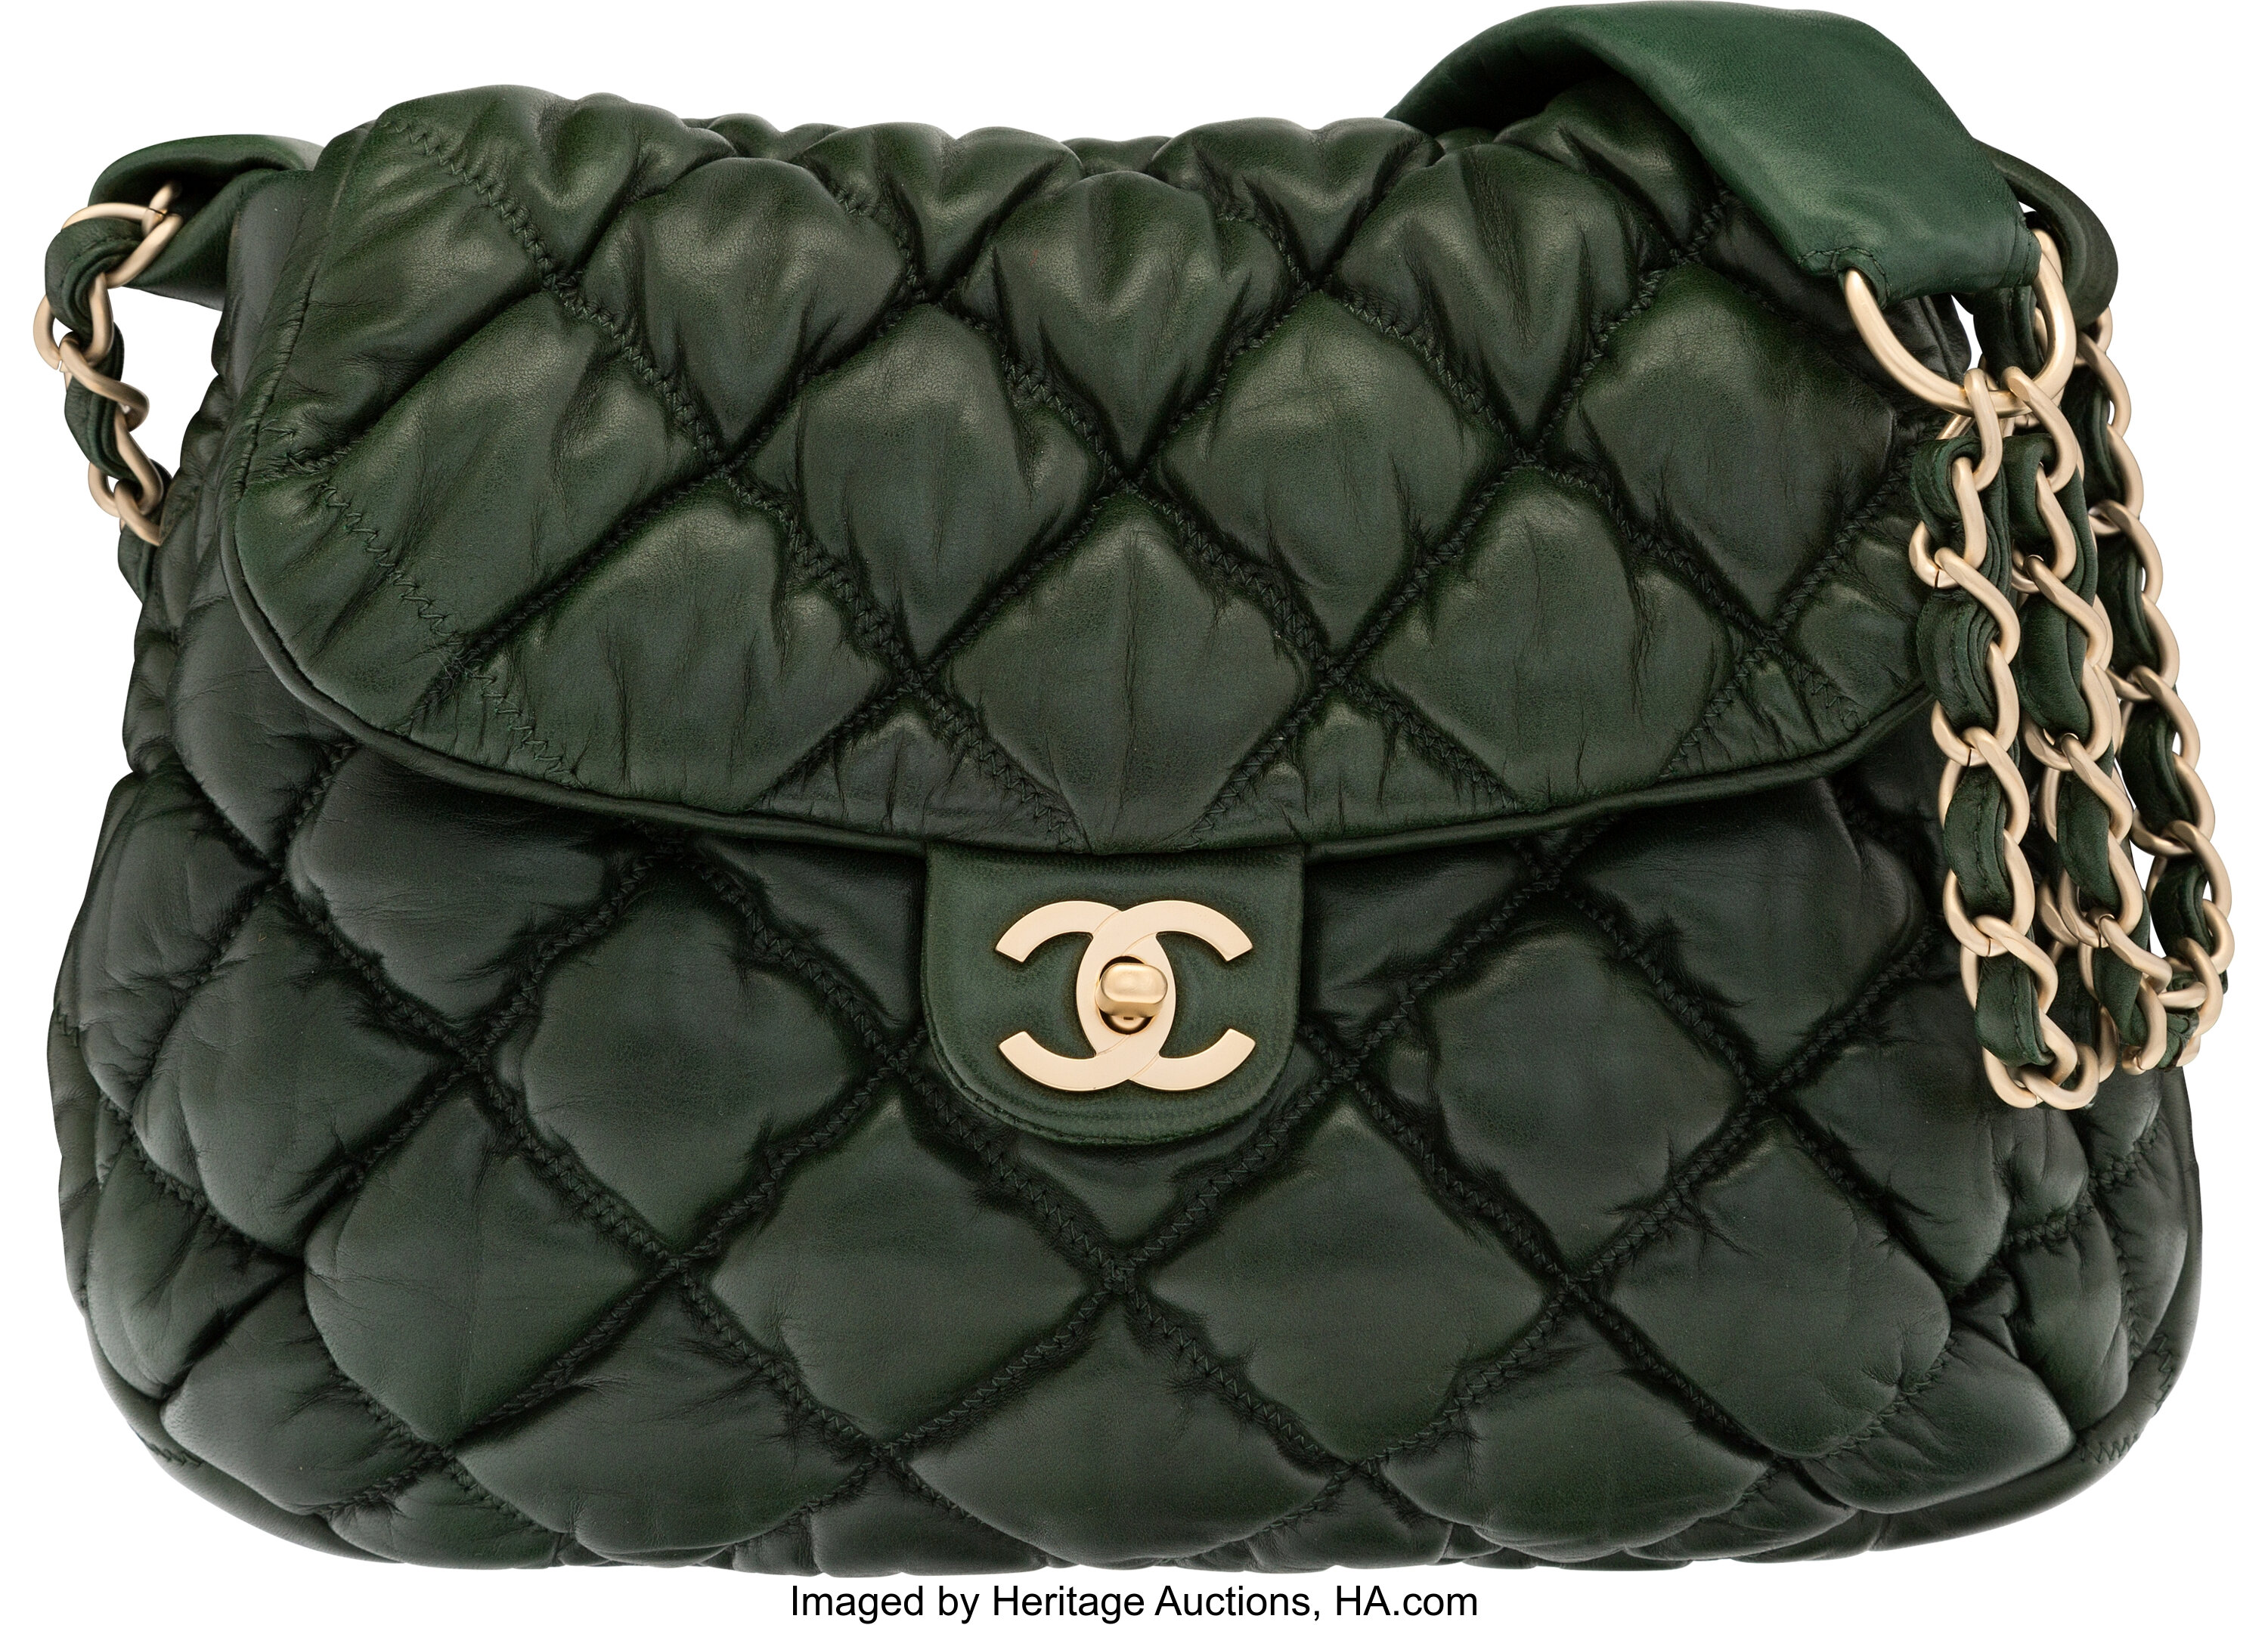 Chanel Dark Green Bubble Quilted Lambskin Leather Shoulder Bag